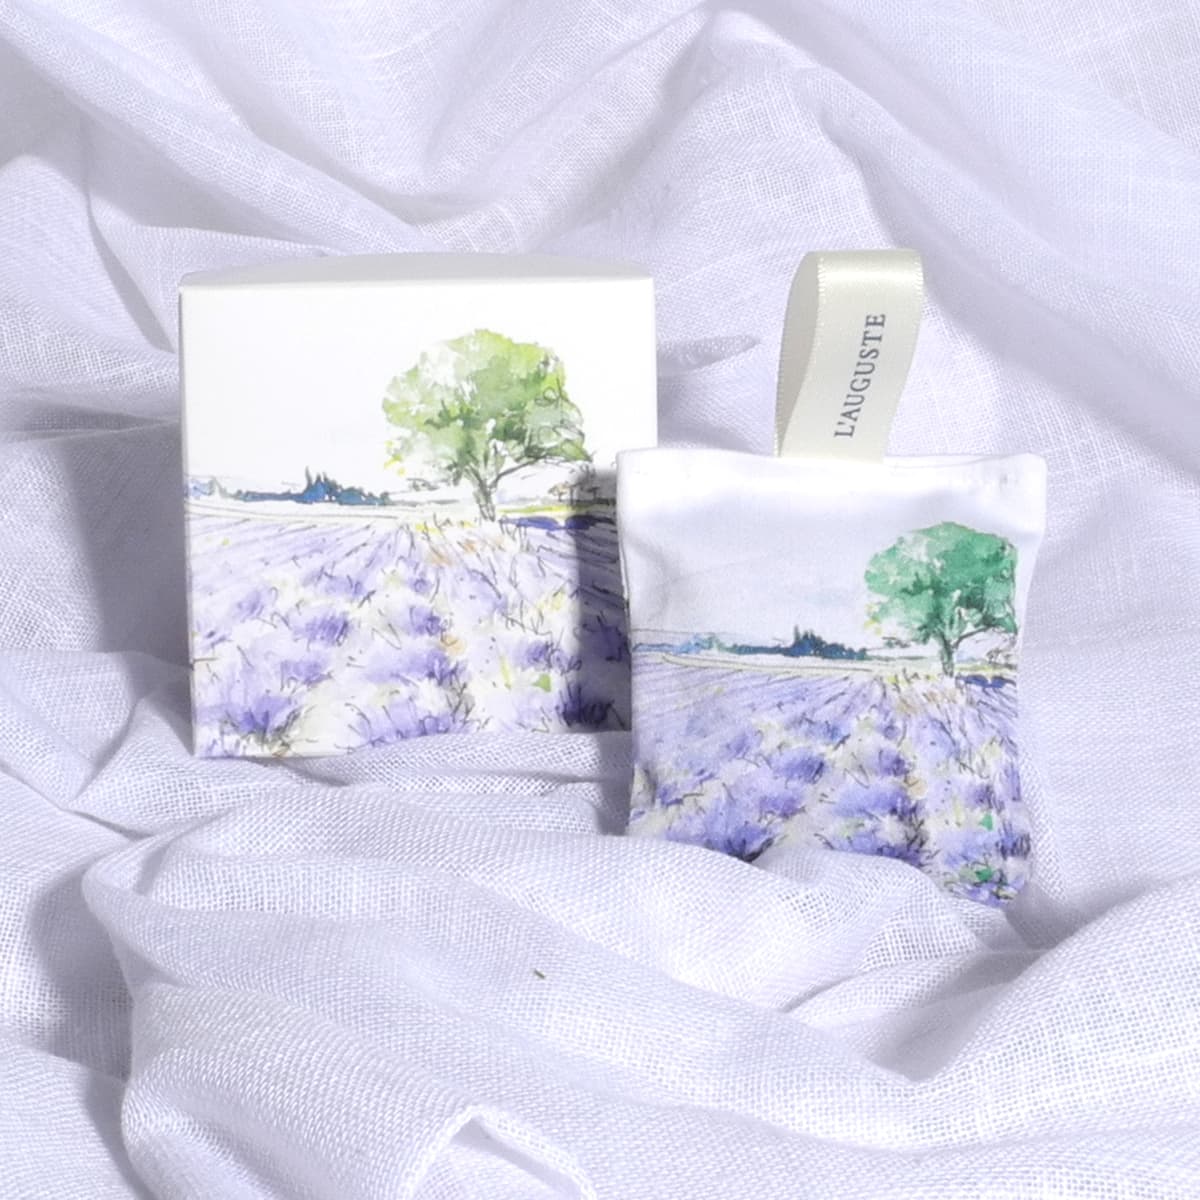 French Provence LARGE LAVENDER SACHET - Pure and Natural Raw